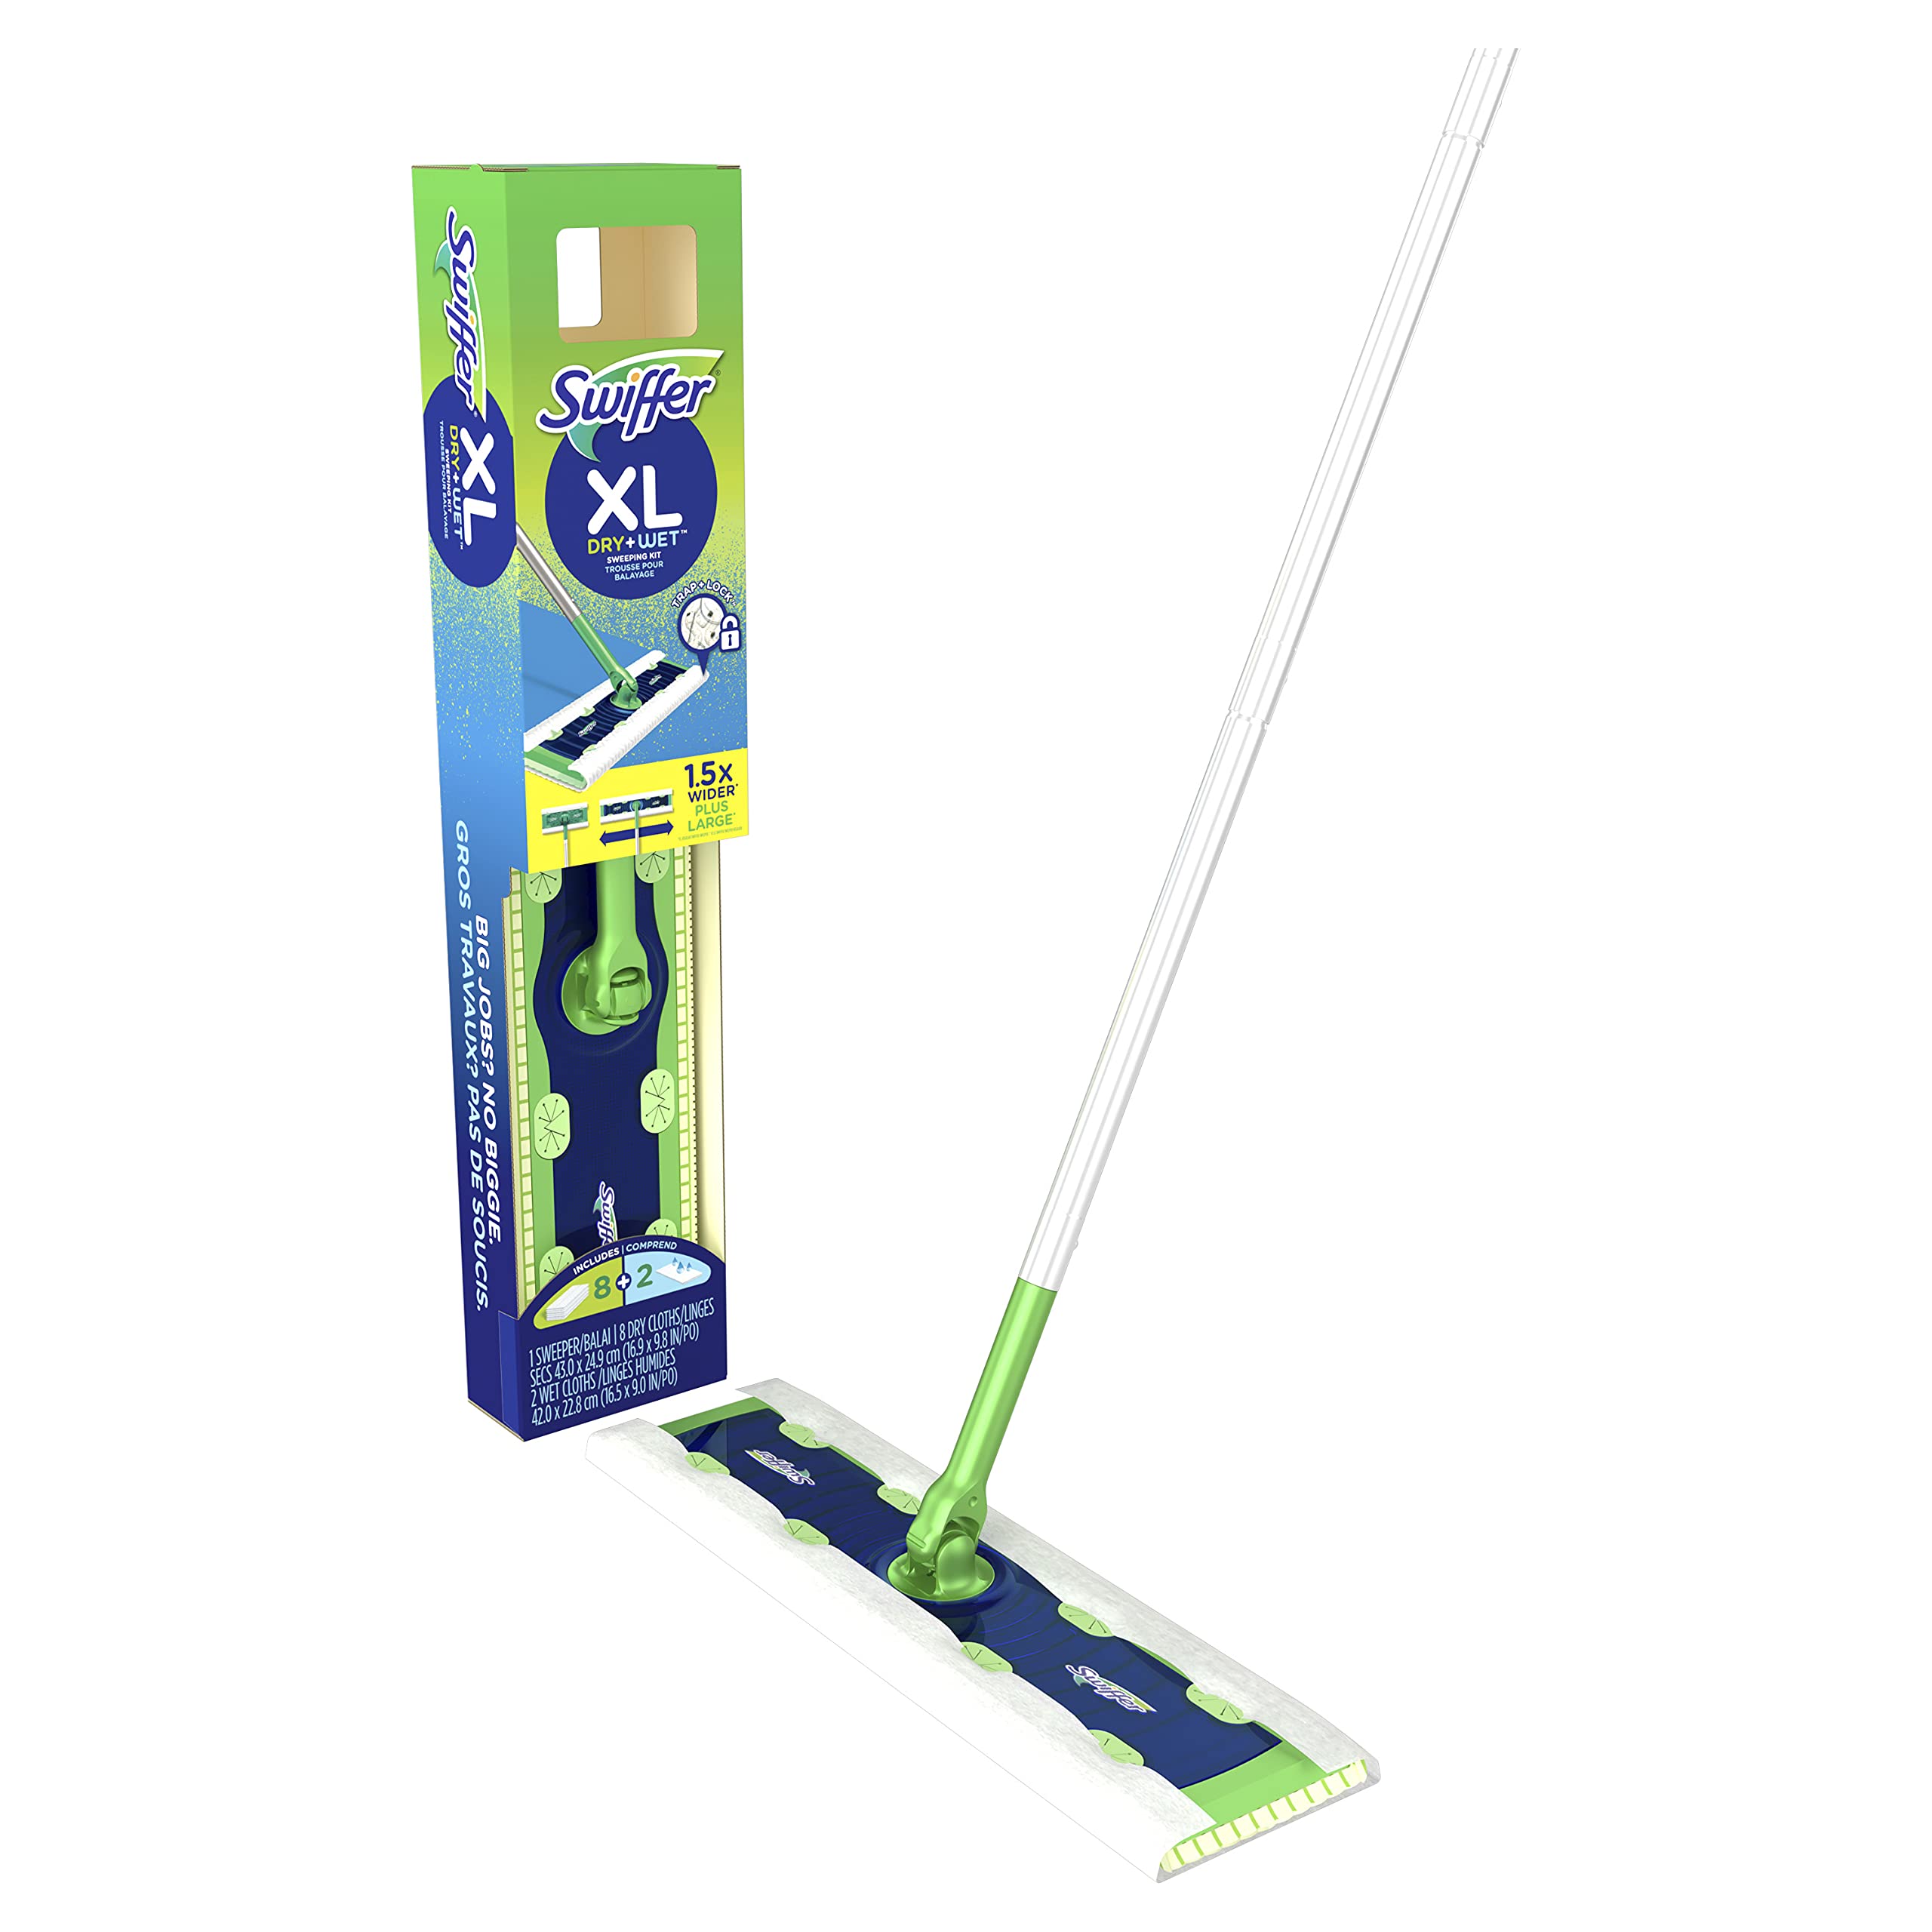 Swiffer Sweeper Dry + Wet XL Sweeping Kit, 1 Sweeper, 8 Dry Cloths, 2 Wet  Cloths XL Starter Kit (New!)